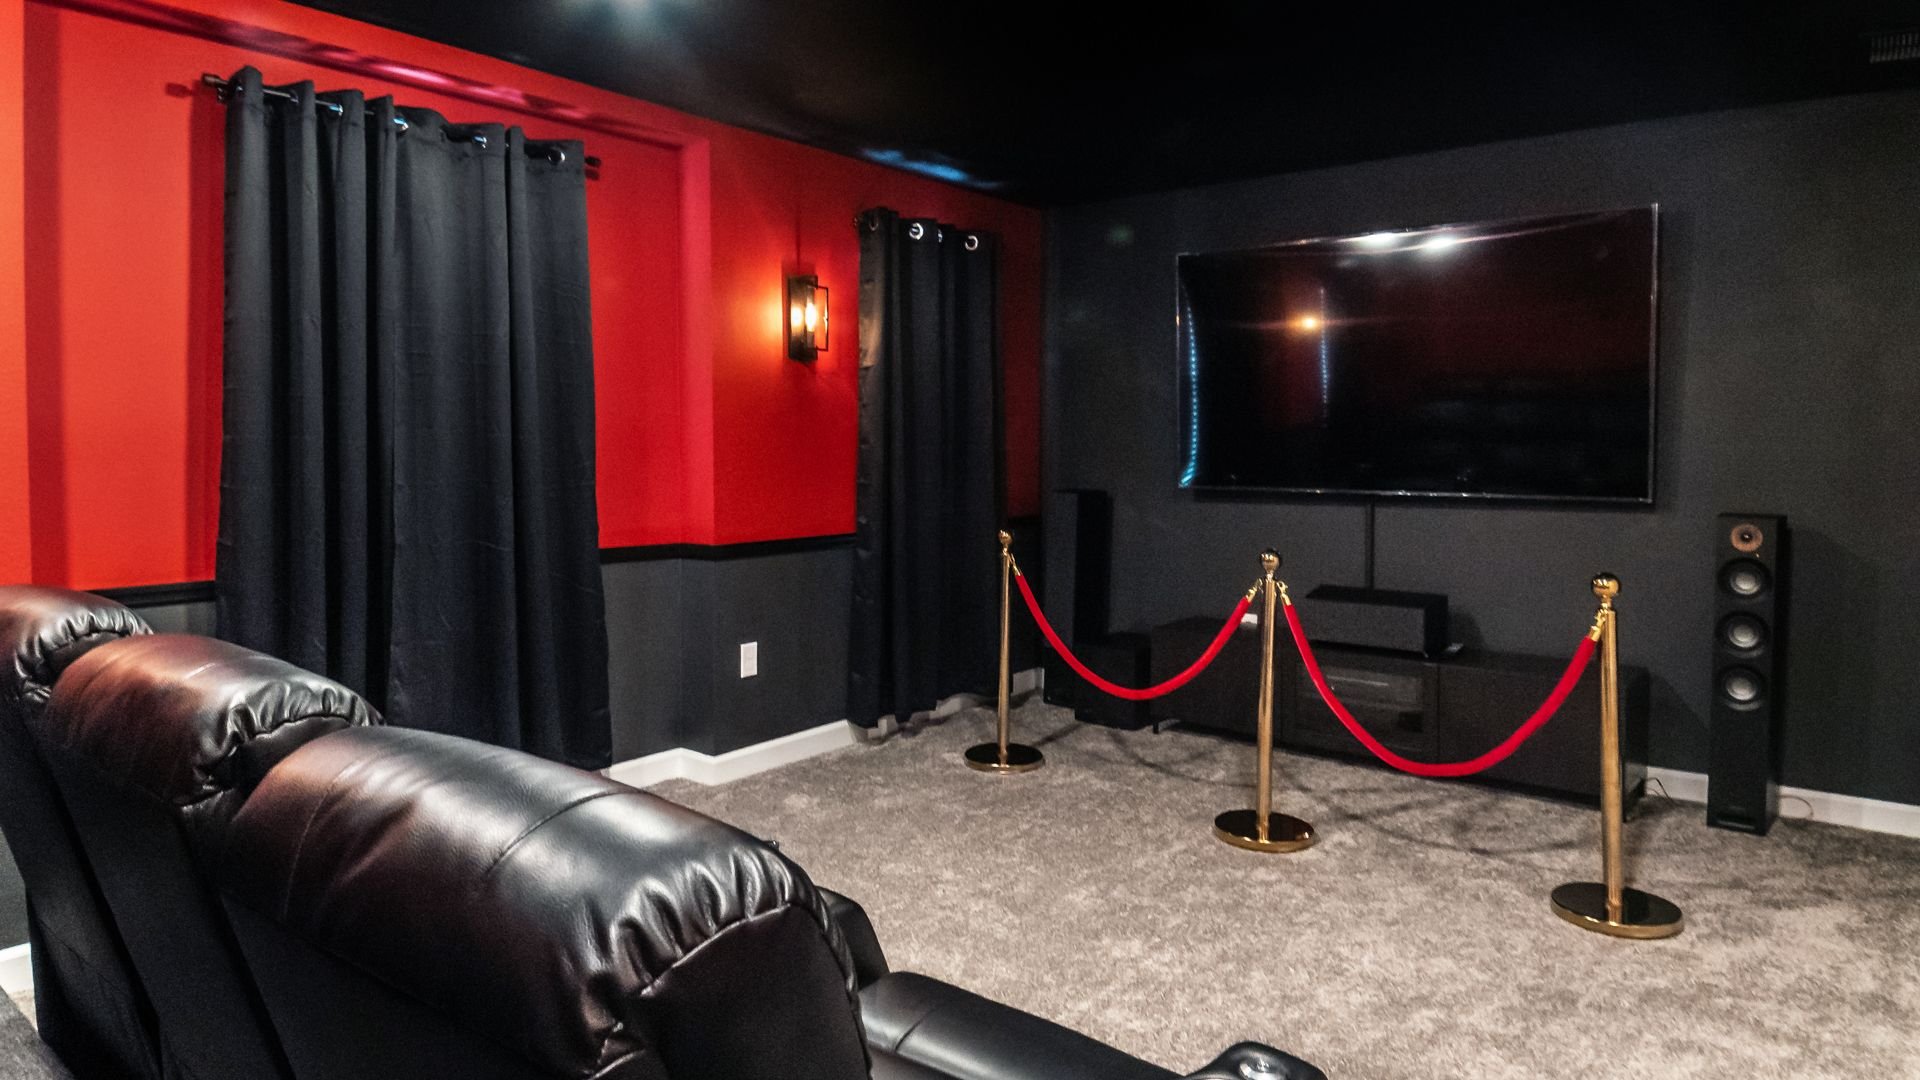 Theater Room (Angle)
82